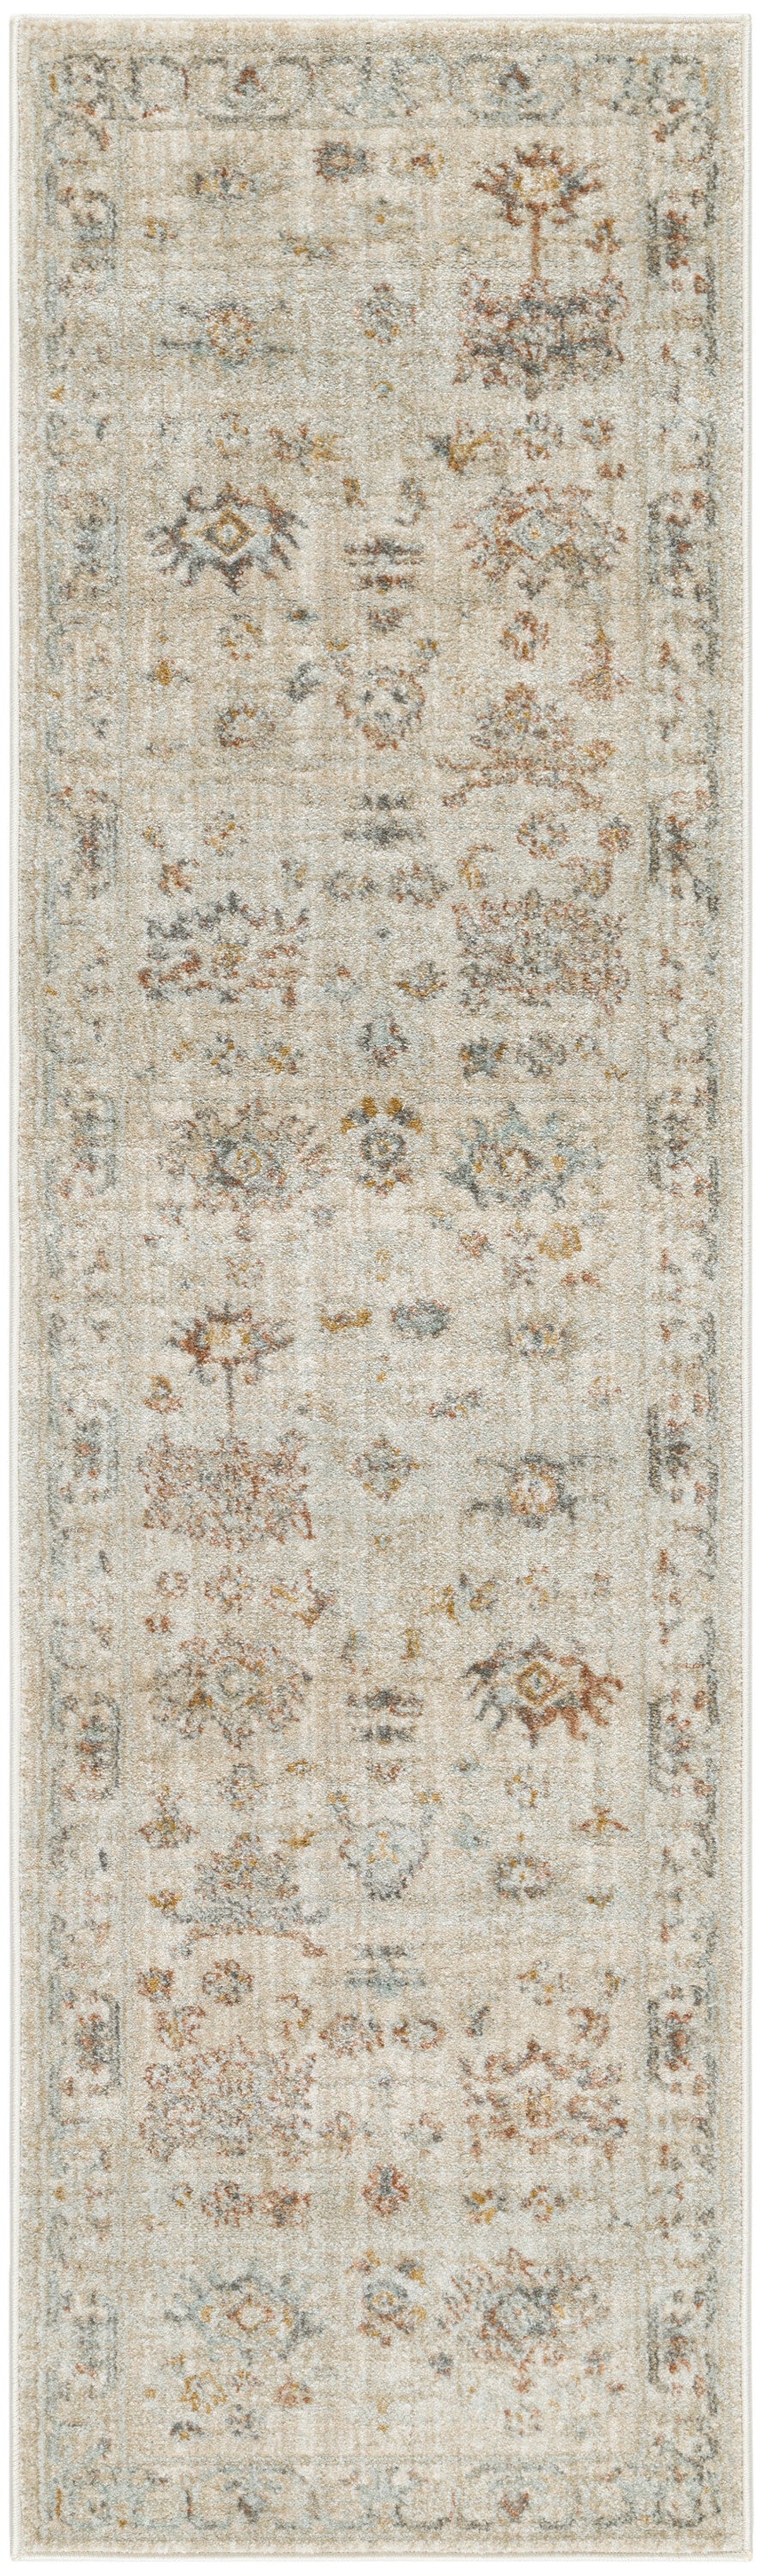 Nourison Home Oases OAE02 Beige Traditional Machinemade Rug